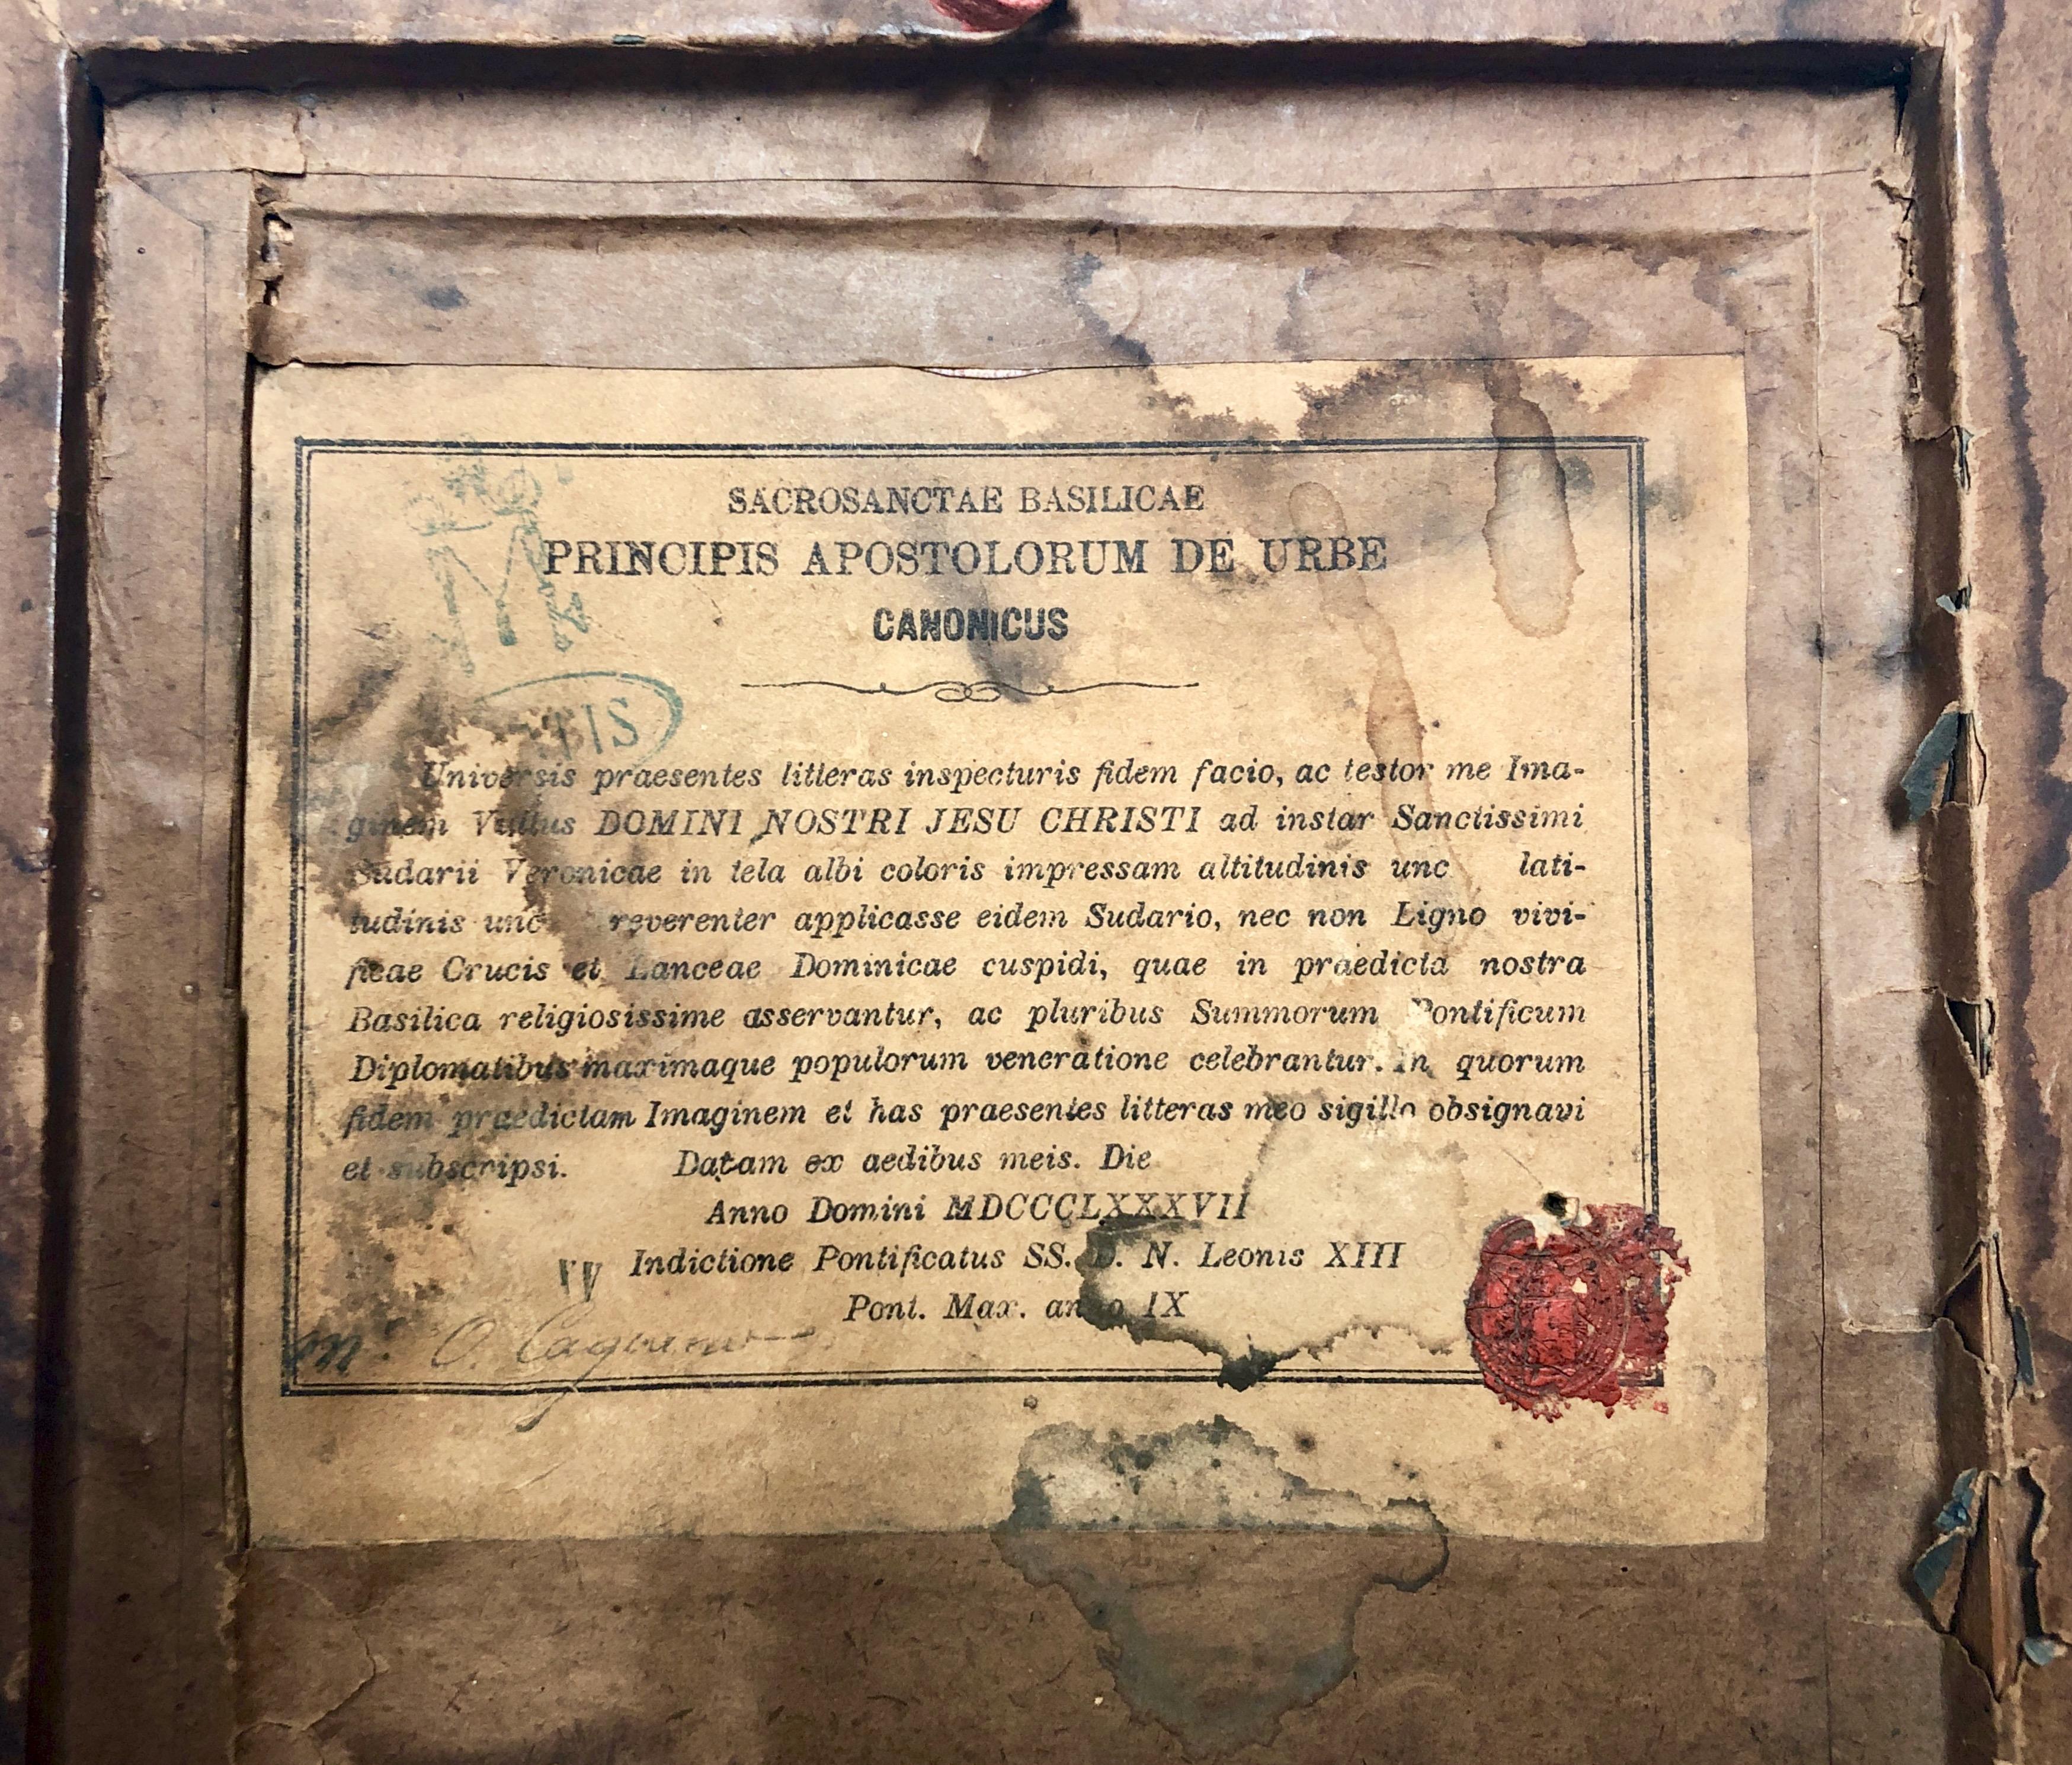 Framed Relic Image of Veronica's Veil, with Vatican Seal and Stamp, Verso 3